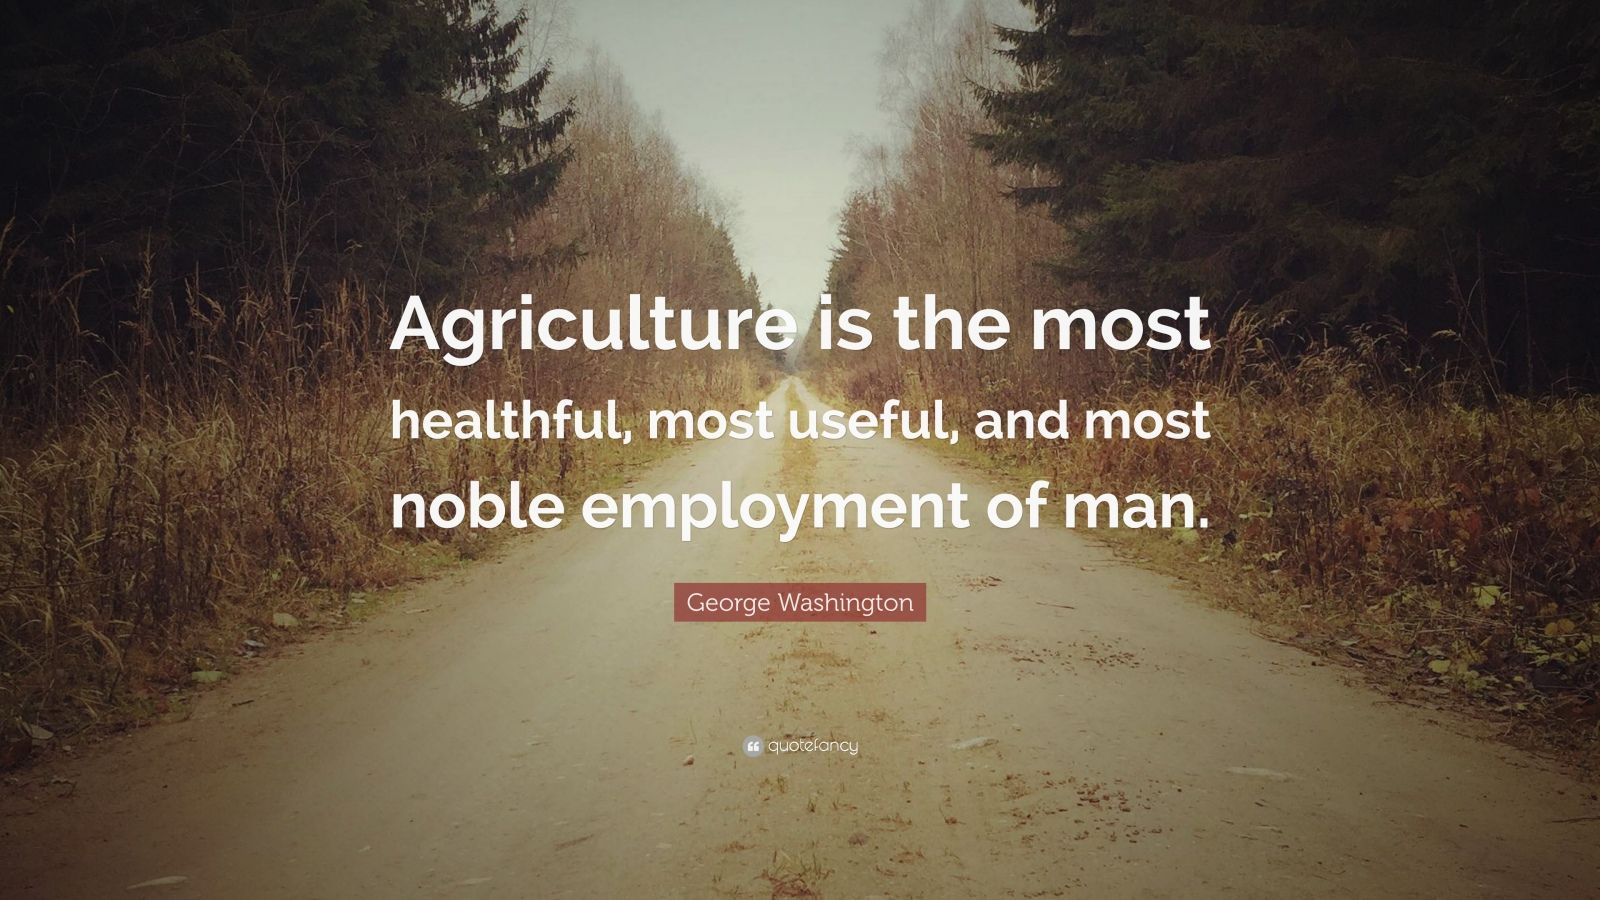 George Washington Quote: “Agriculture is the most healthful, most